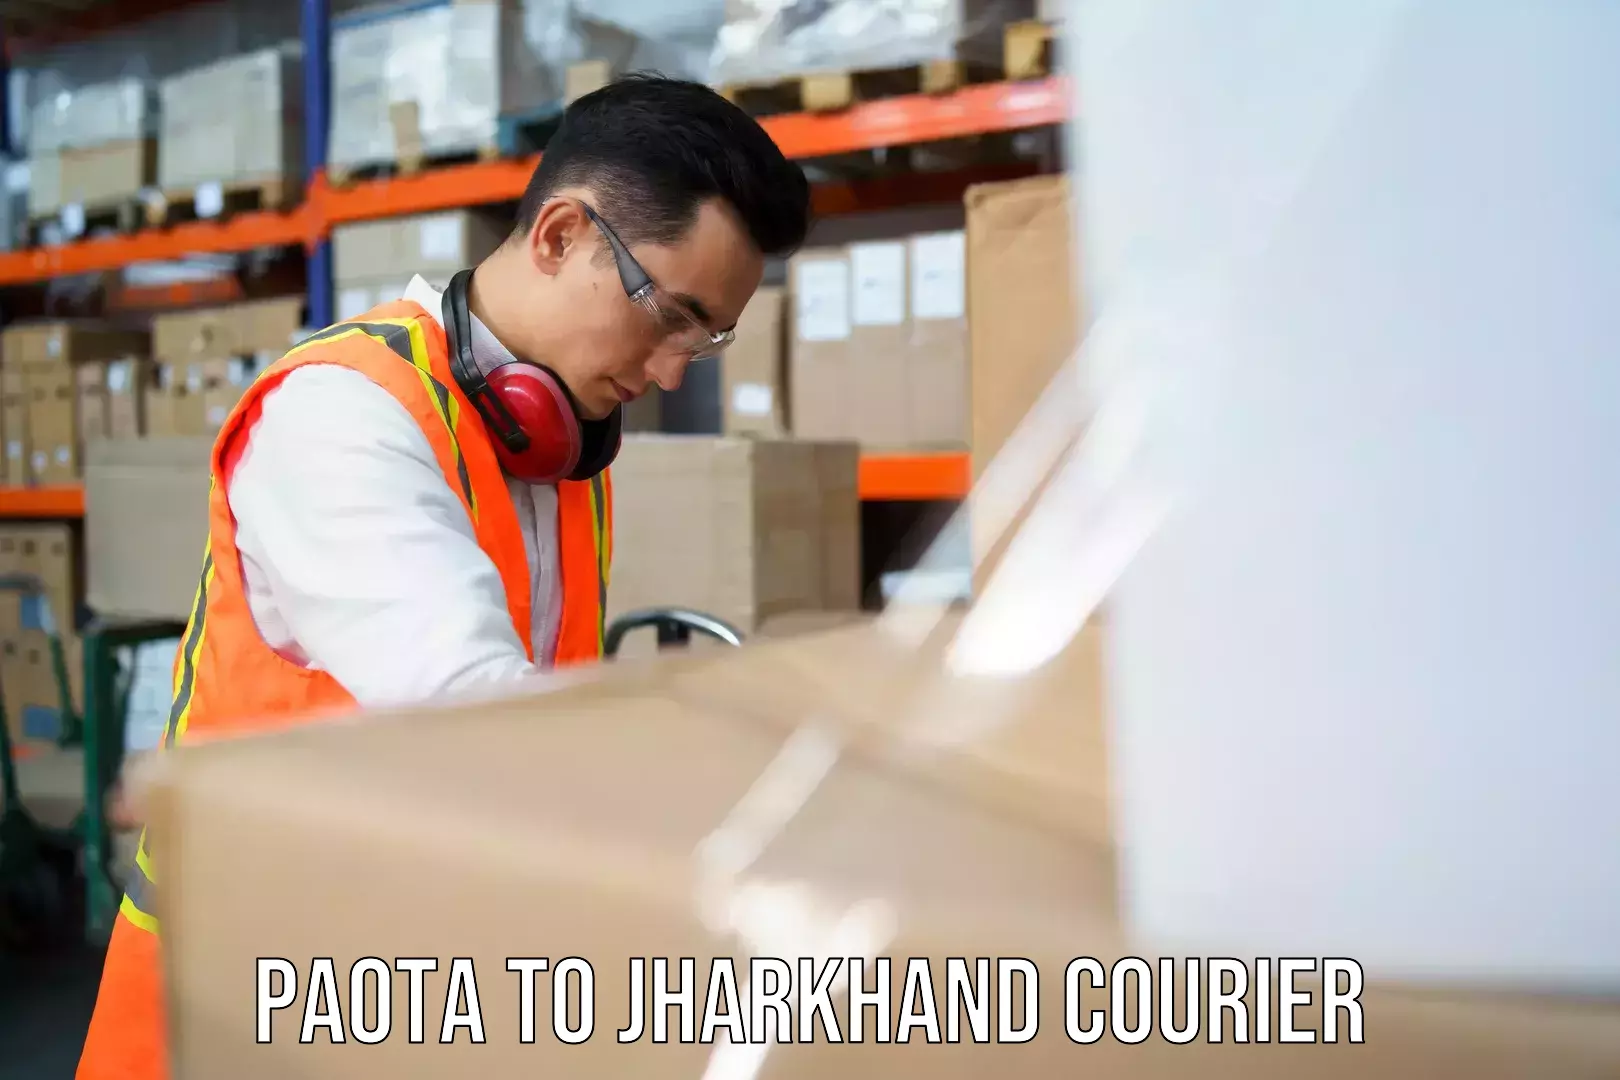 Sustainable courier practices Paota to Peterbar